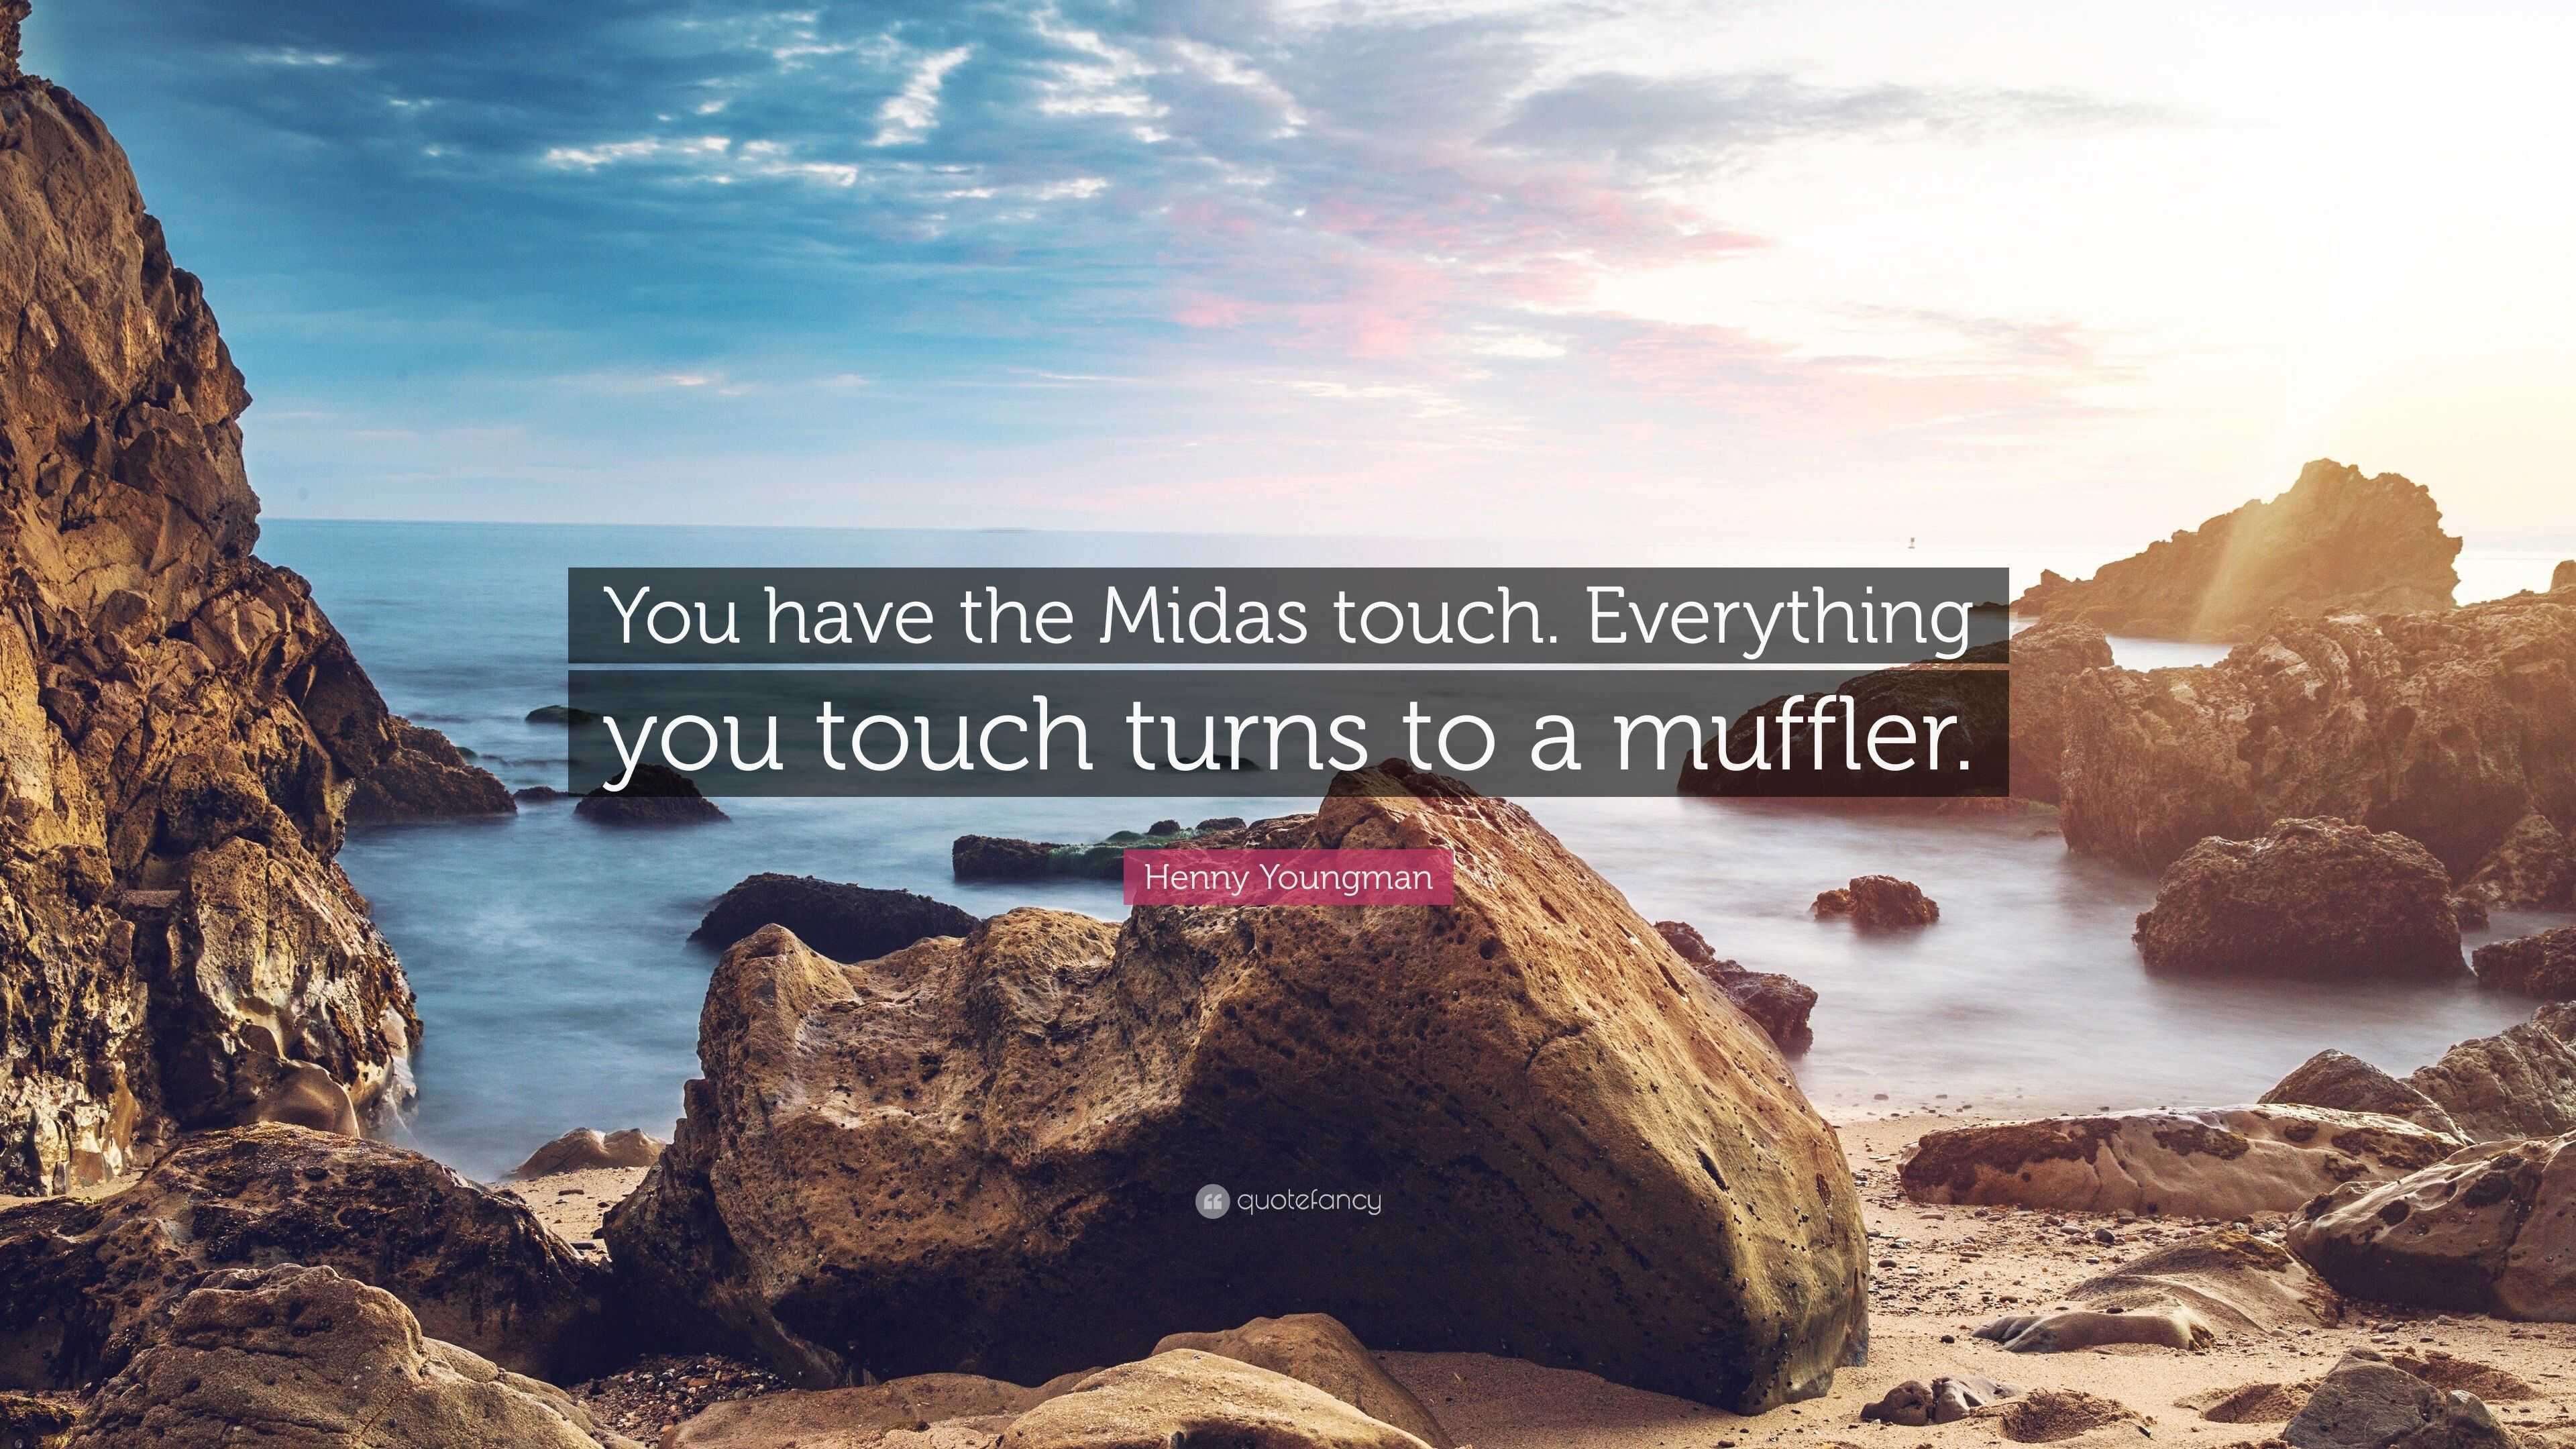 450 Midas touch ideas  inspirational quotes, life quotes, motivational  quotes